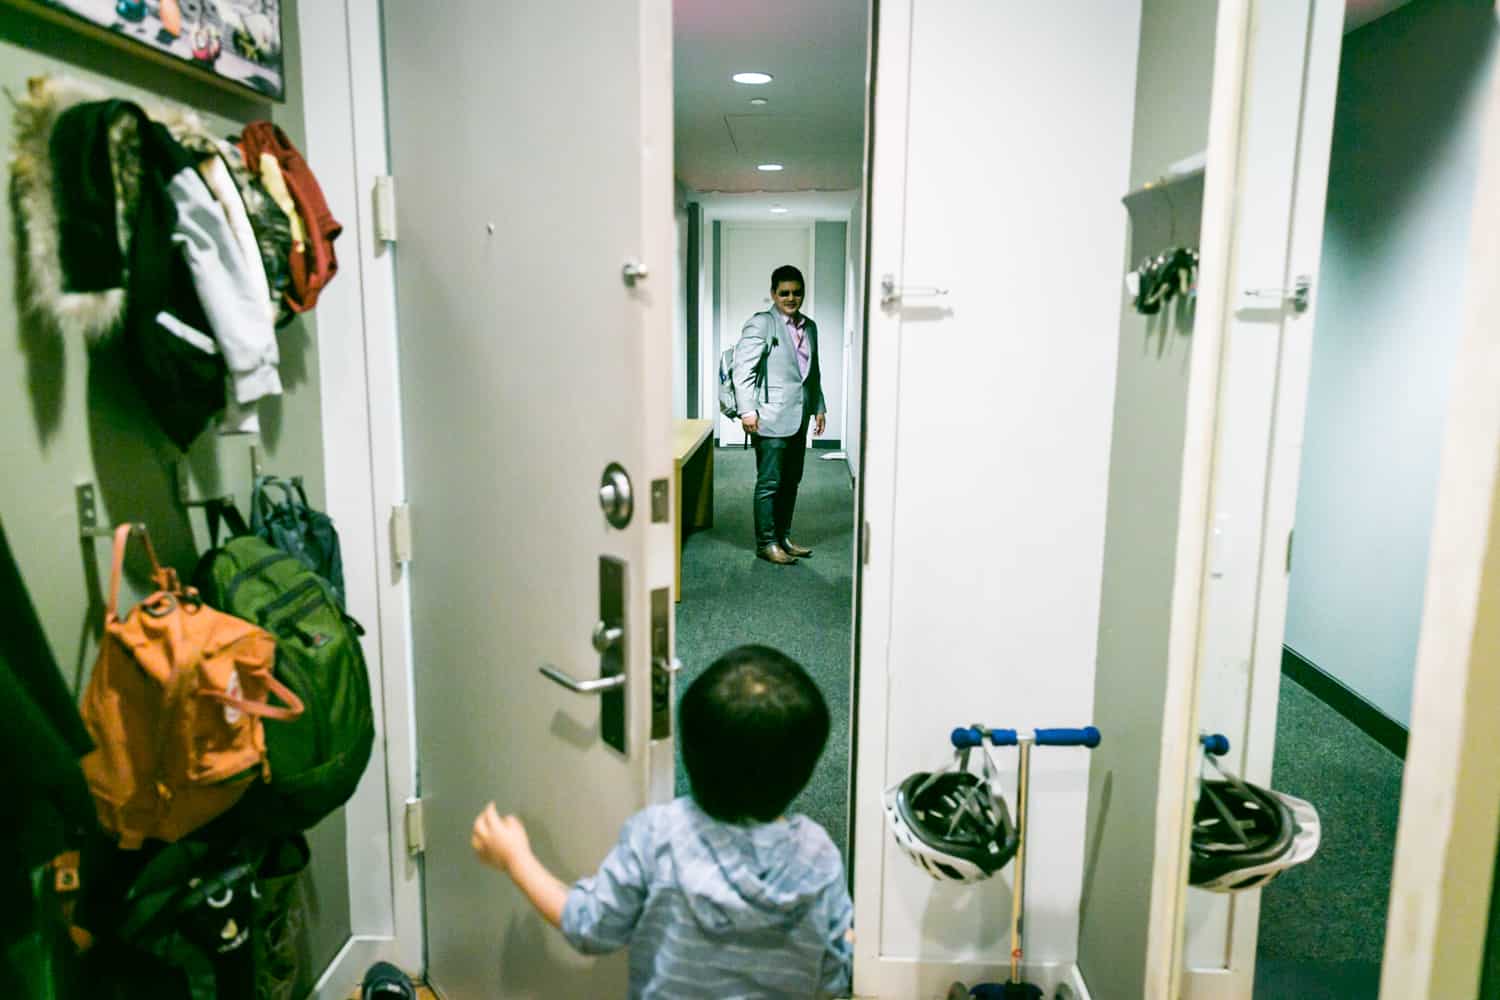 Little boy opening door to see father in hallway